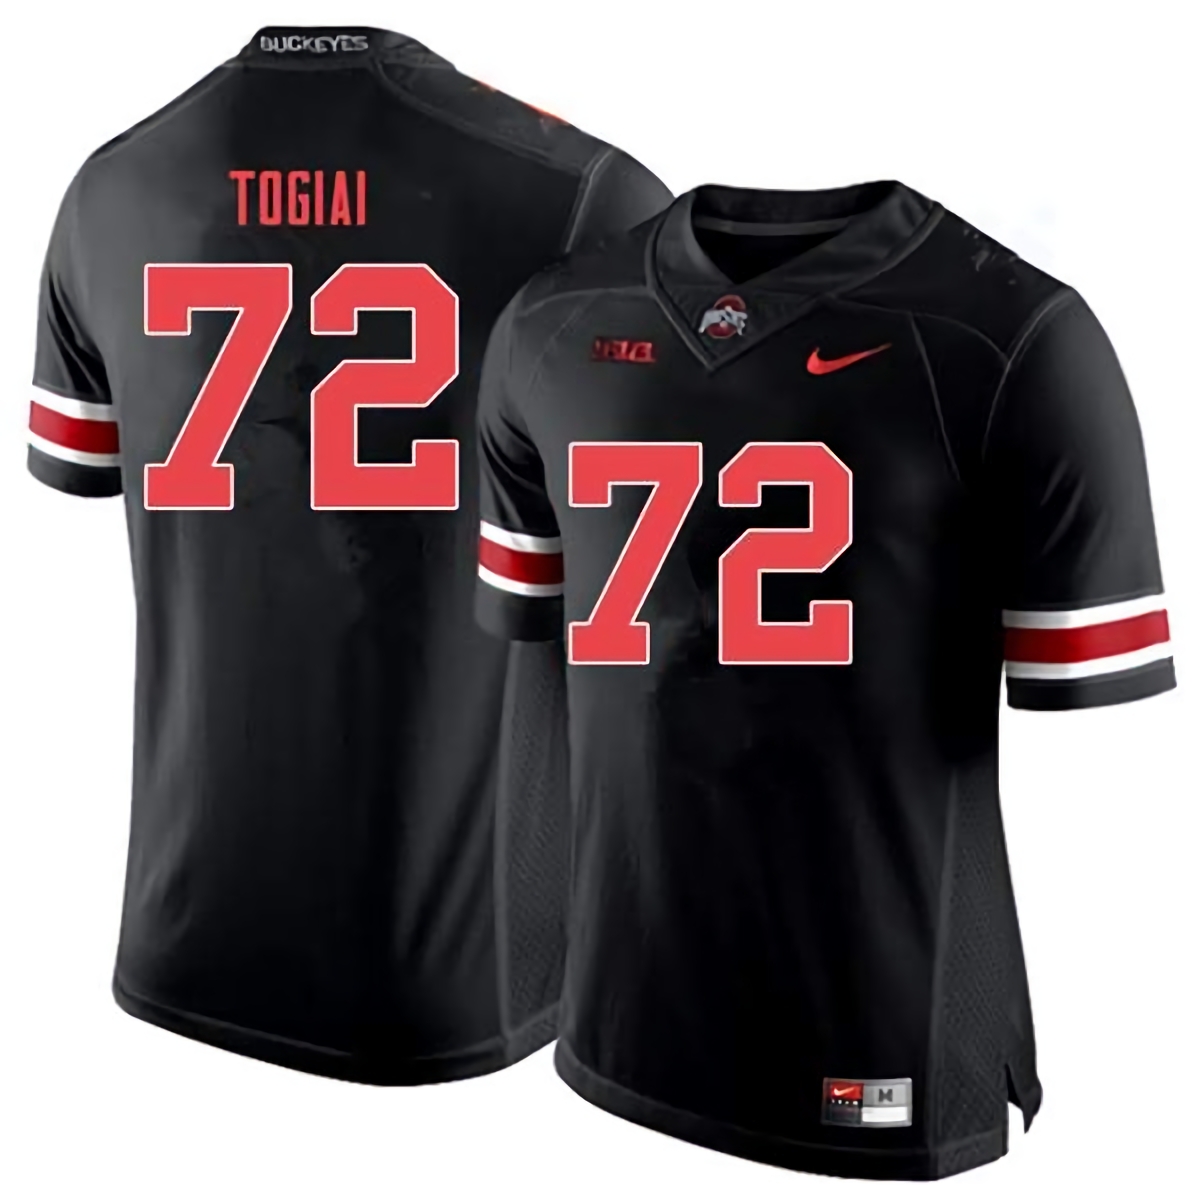 Tommy Togiai Ohio State Buckeyes Men's NCAA #72 Nike Black Out College Stitched Football Jersey UGI1556HD